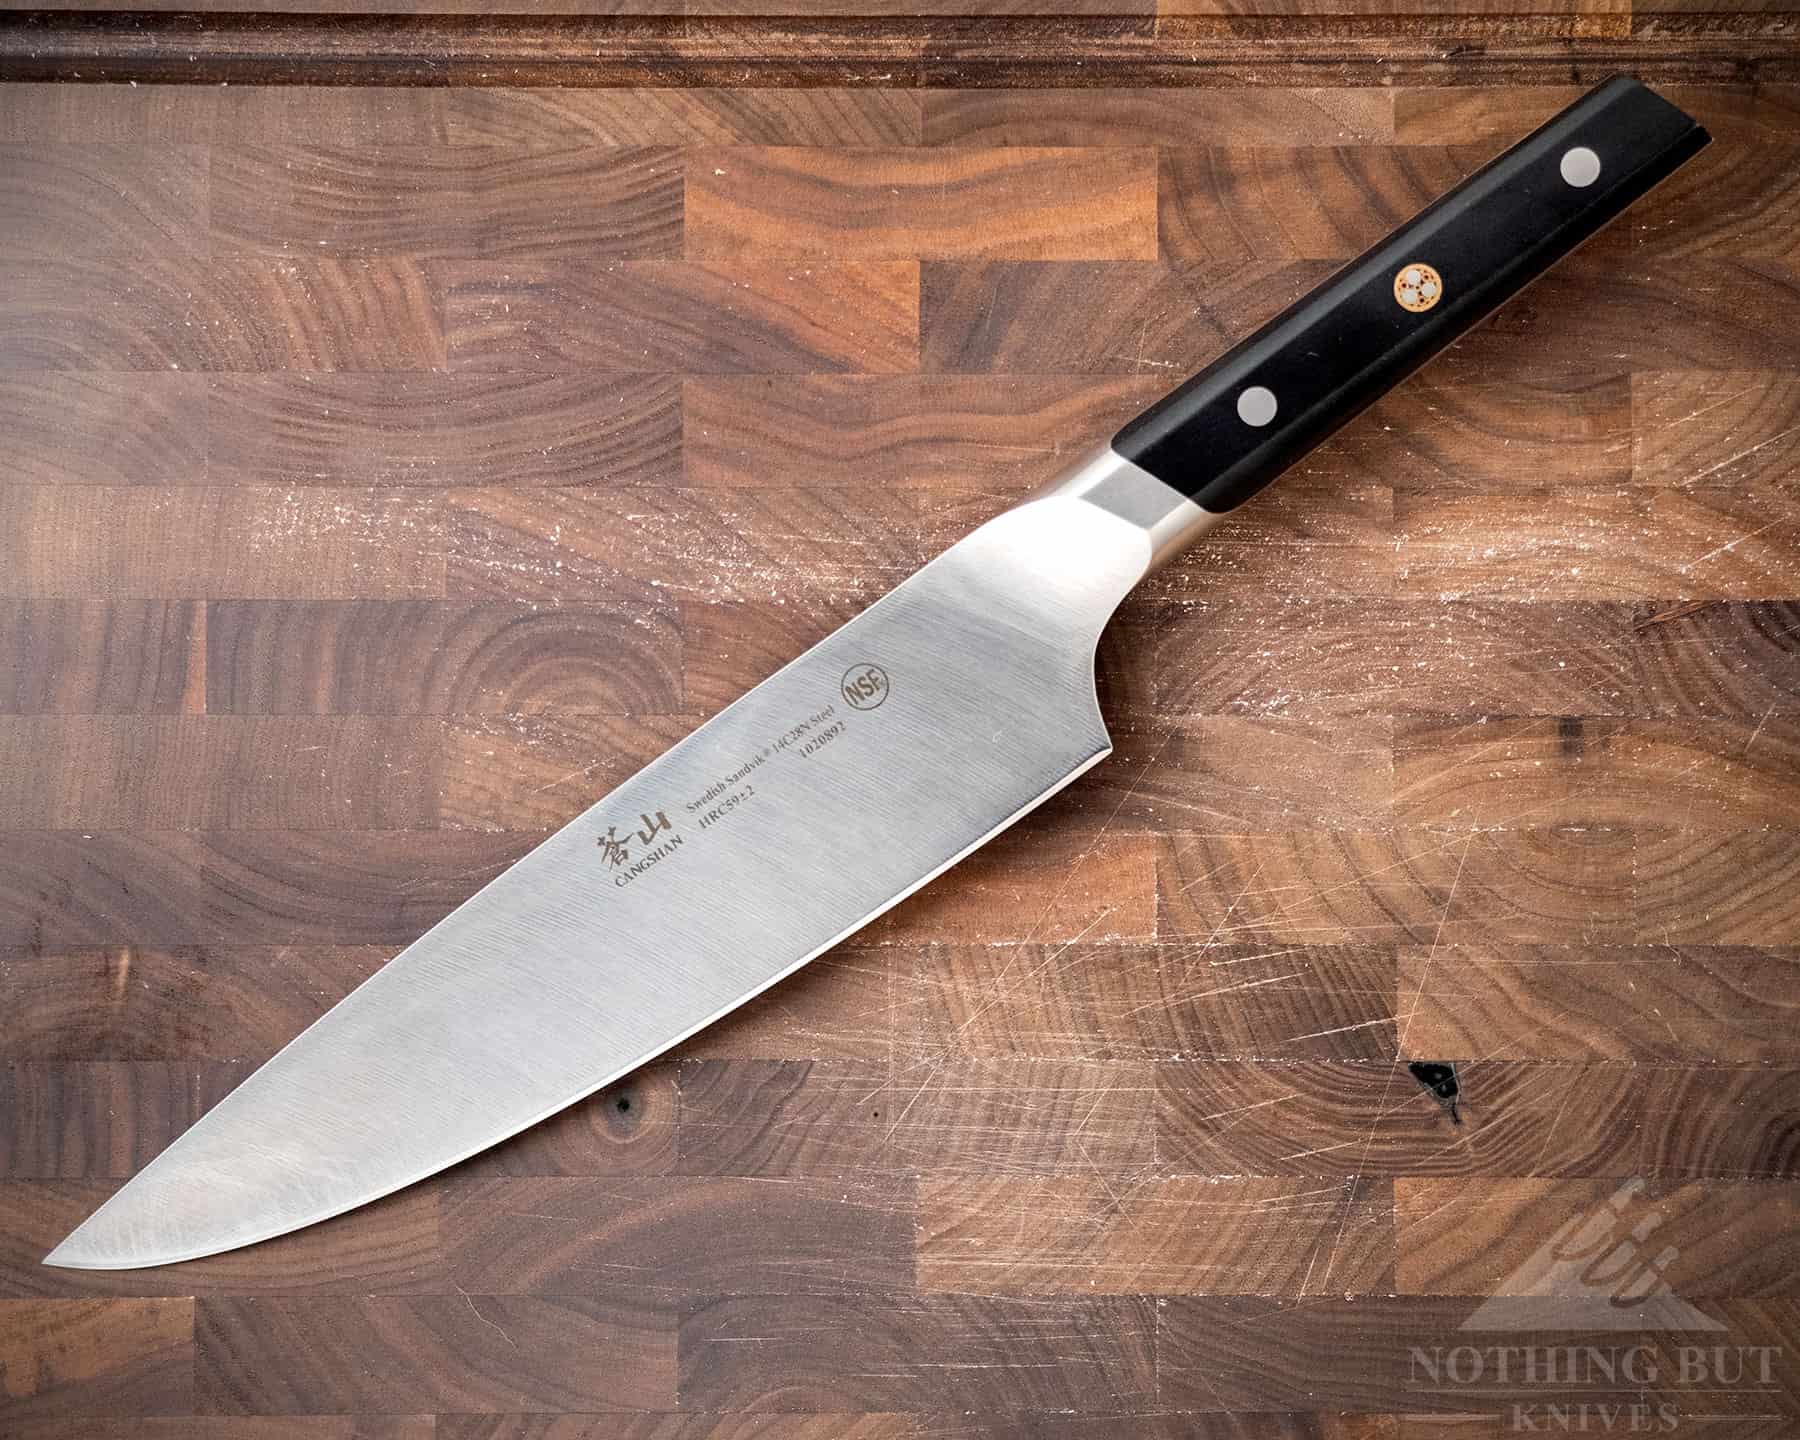 A photo from a high angle to show the long neck of the Cangshan TC chef knife.